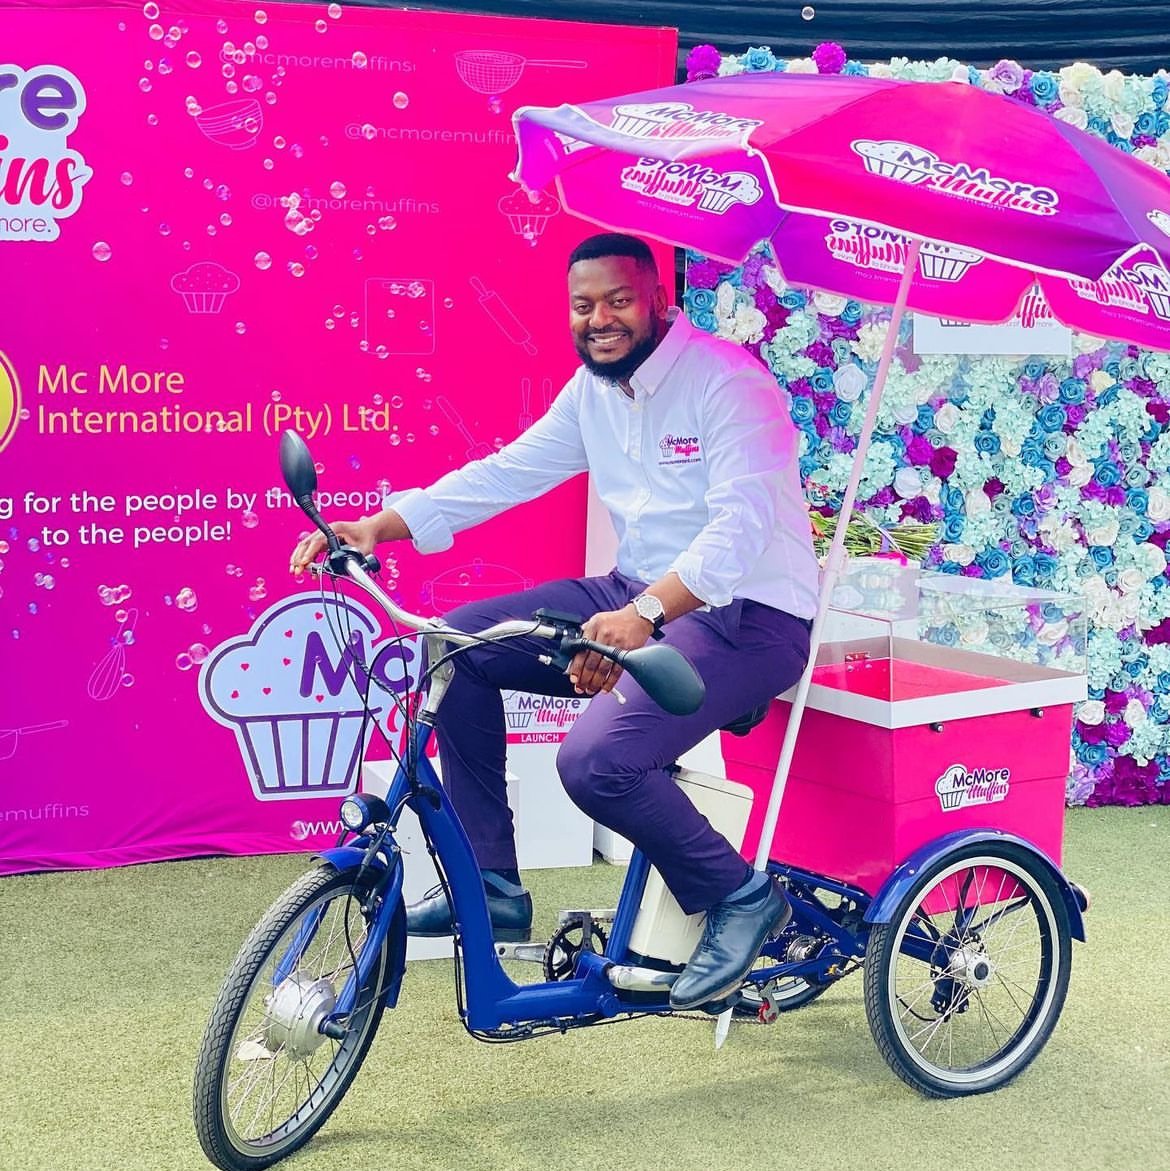 Morero Nhlanhla Moloi, affectionately known as “The Muffin Man,” is a determined and charismatic entrepreneur from Soweto who is making waves in the franchising industry. Click here to read more about his entrepreneurial journey: sabfoundation.co.za/stories